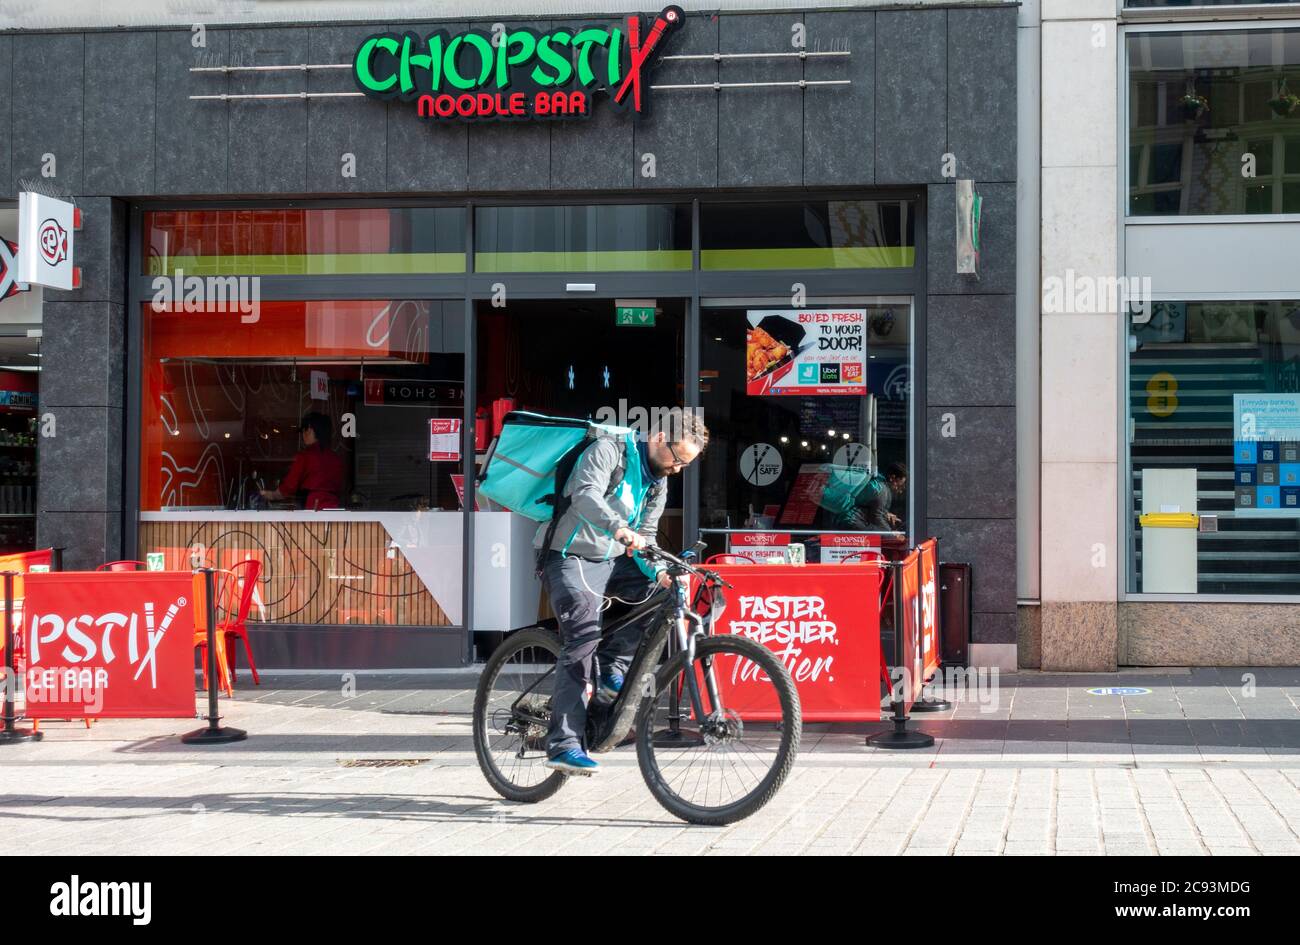 Bicycle delivery man about to deliver Chinese food from Chopsticks in Liverpool Stock Photo